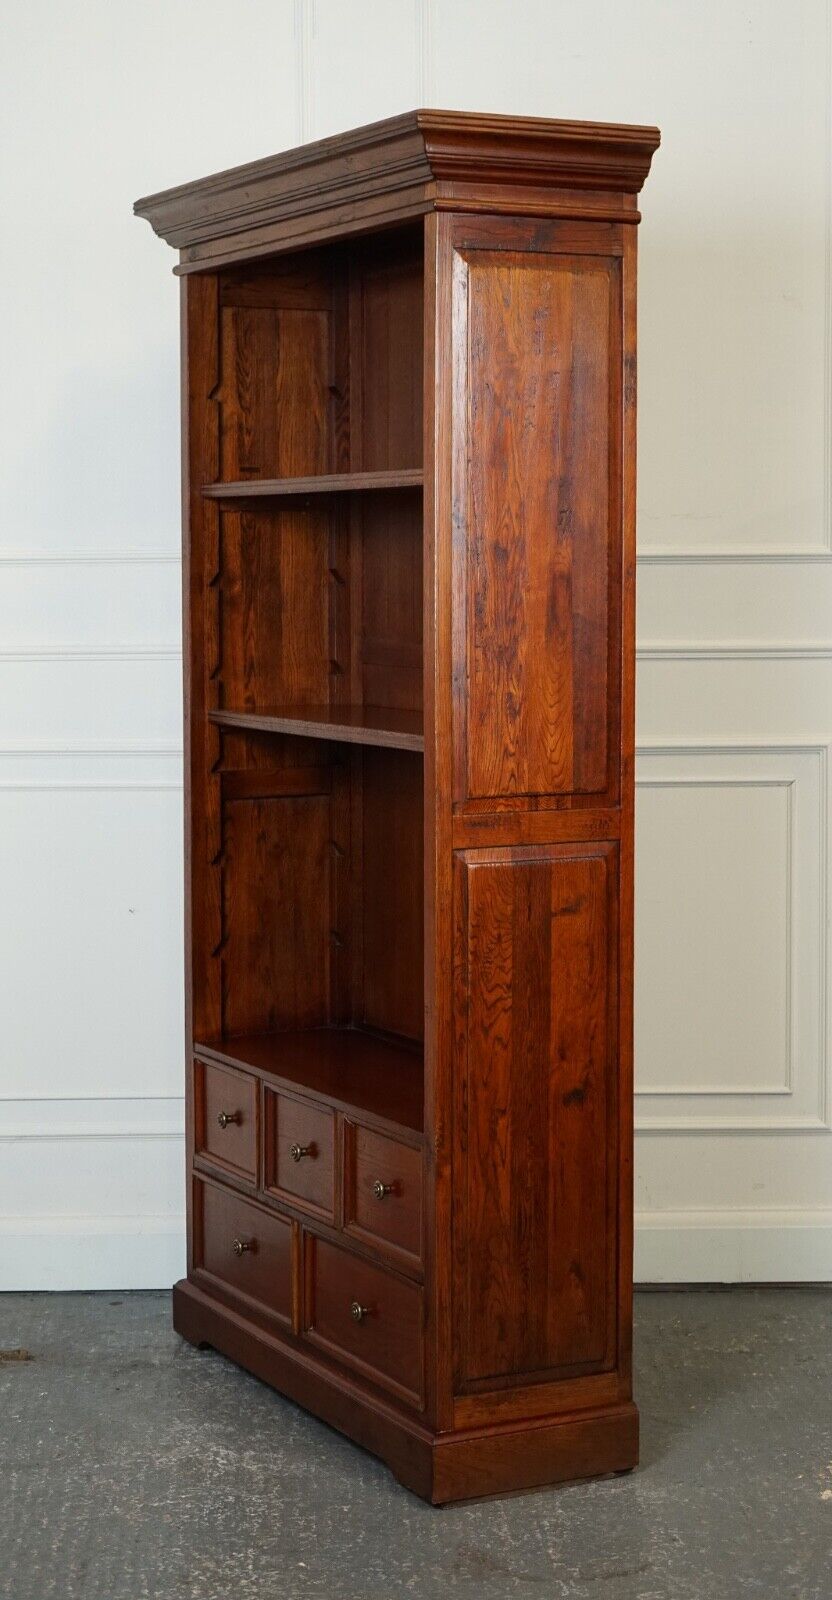 LOVELY VINTAGE TEAK OPEN BOOKCASE WITH 5 DRAWERS BRASS HANDLES J1